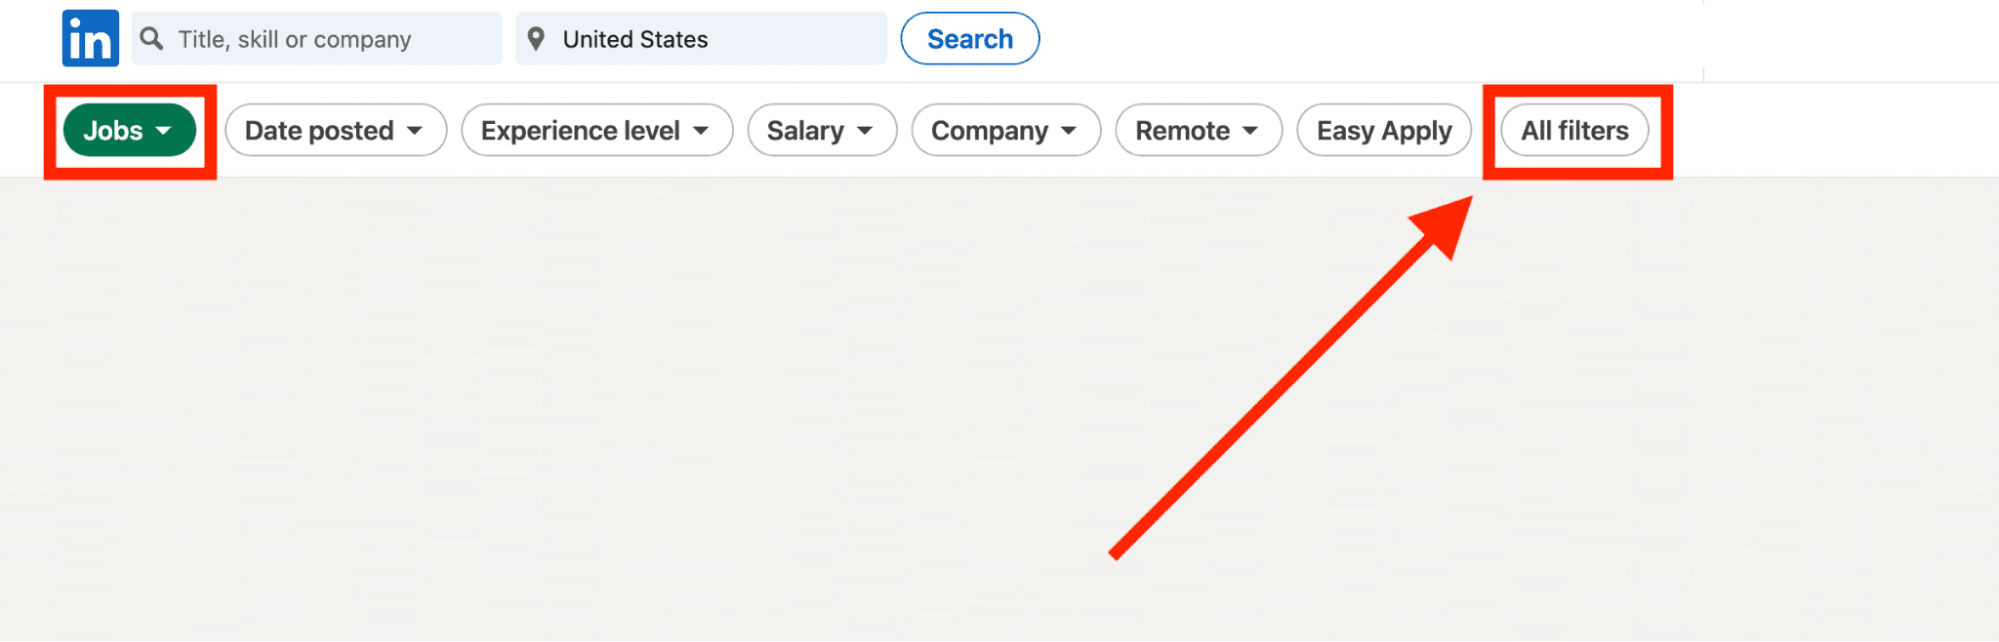 linkedin jobs search click on all filters - image78.png